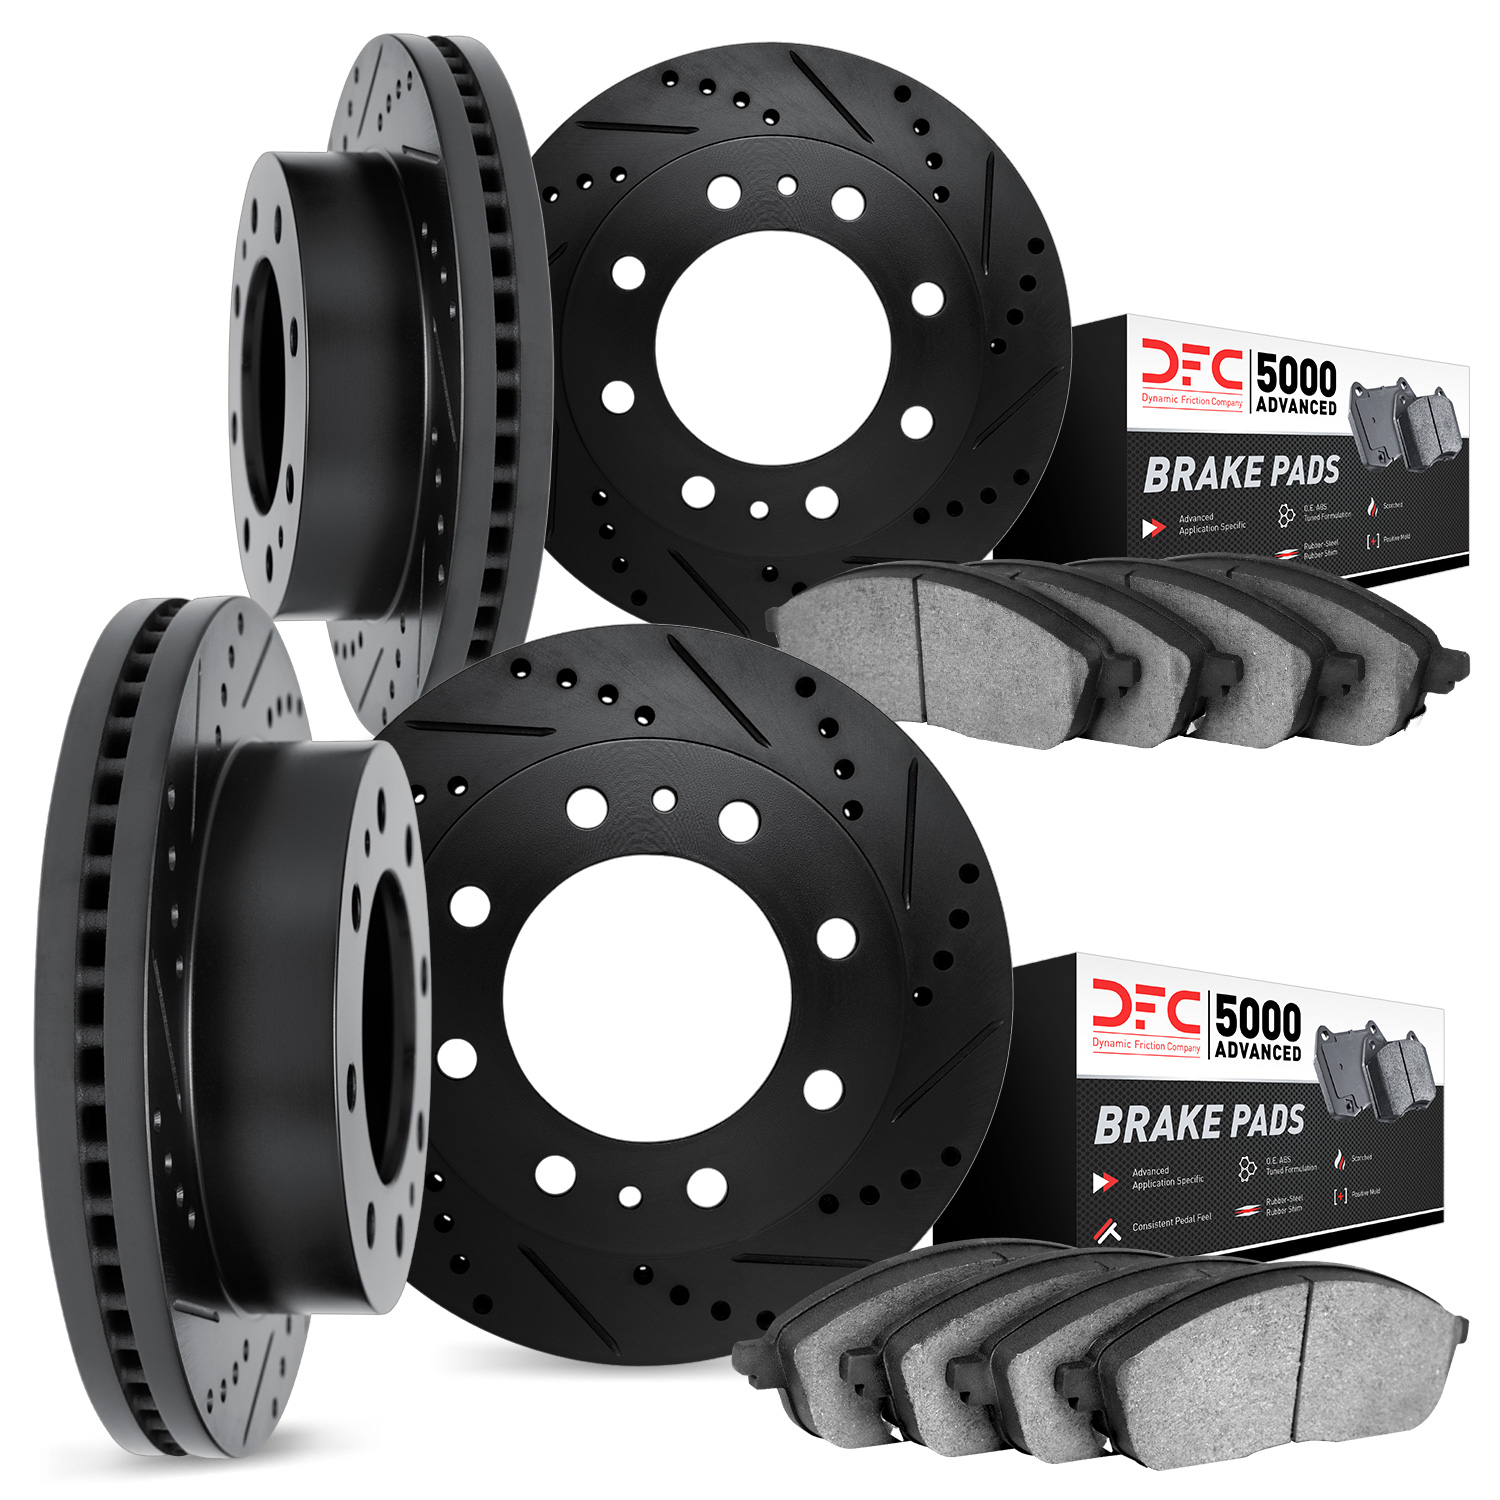 8504-46011 Drilled/Slotted Brake Rotors w/5000 Advanced Brake Pads Kit [Black], 2006-2011 GM, Position: Front and Rear